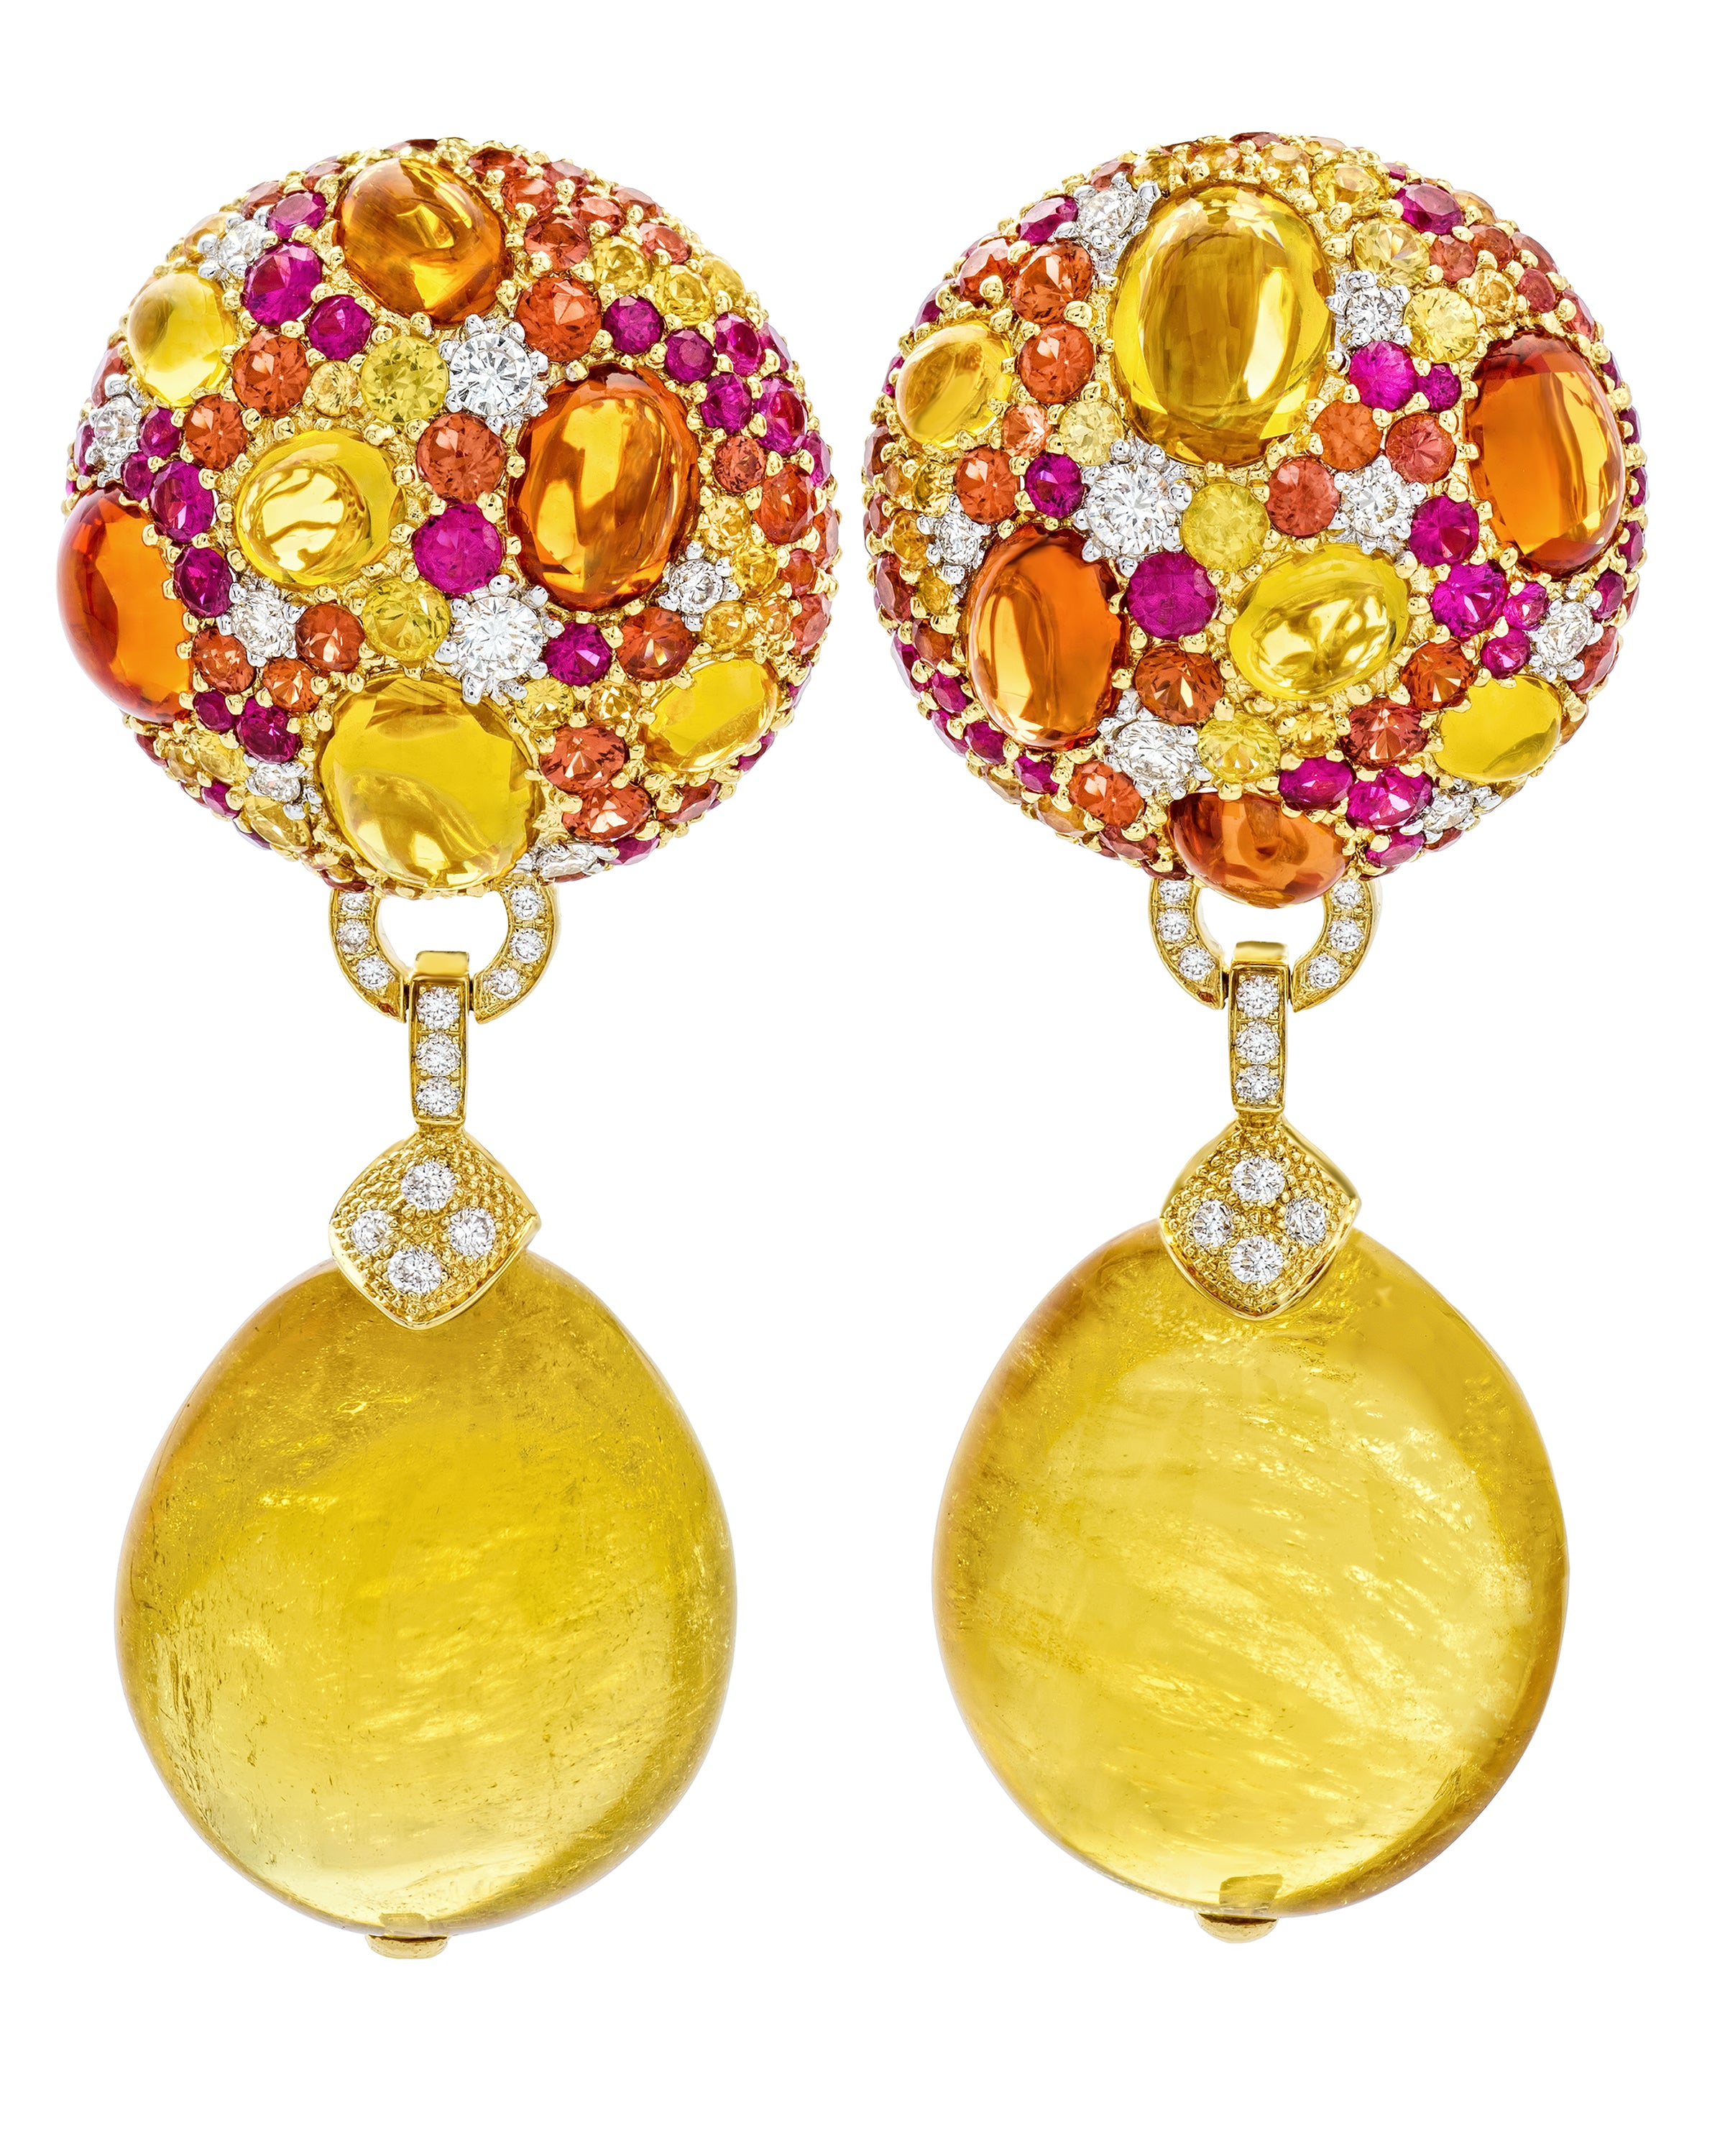 Marigold cookie earrings with golden beryl drops and tops enhanced with a myriad of gemstones and diamonds, crafted in 18 karat yellow gold.